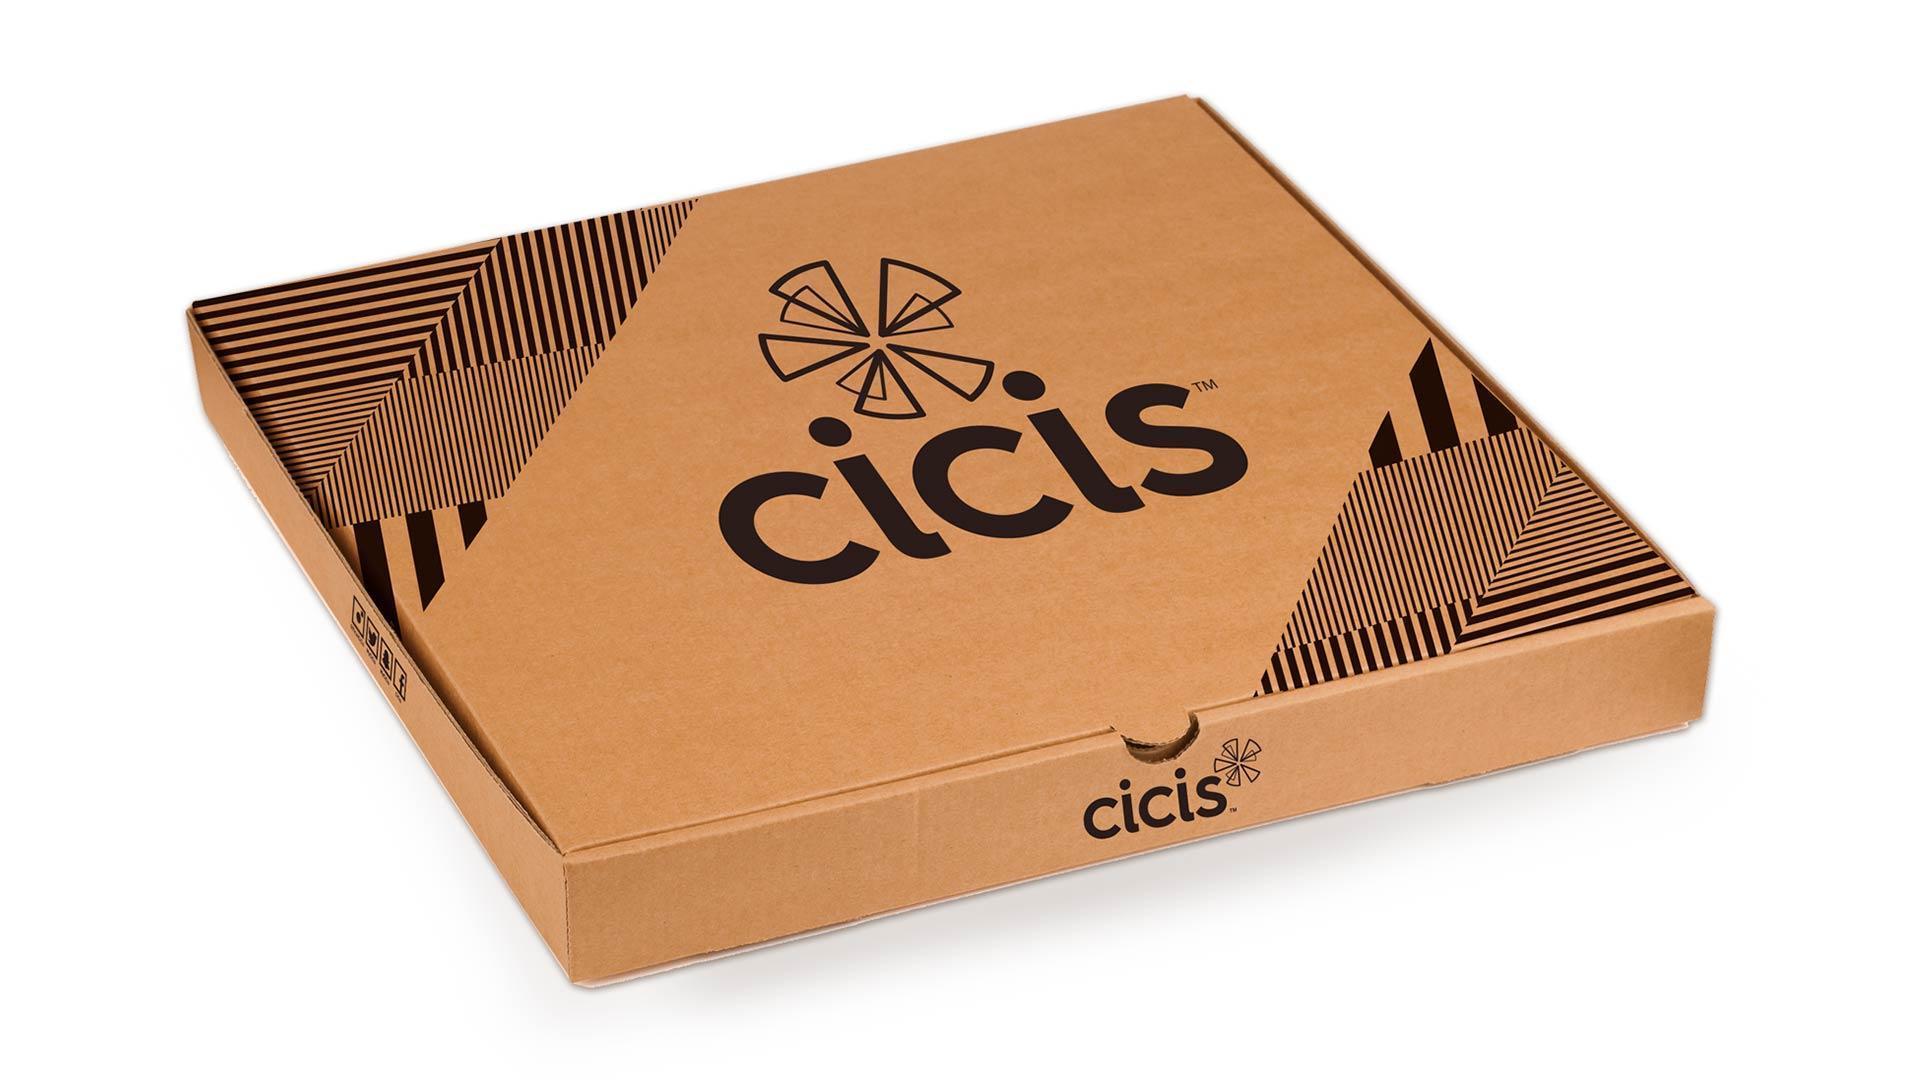 cicis-brand-identity-packaging